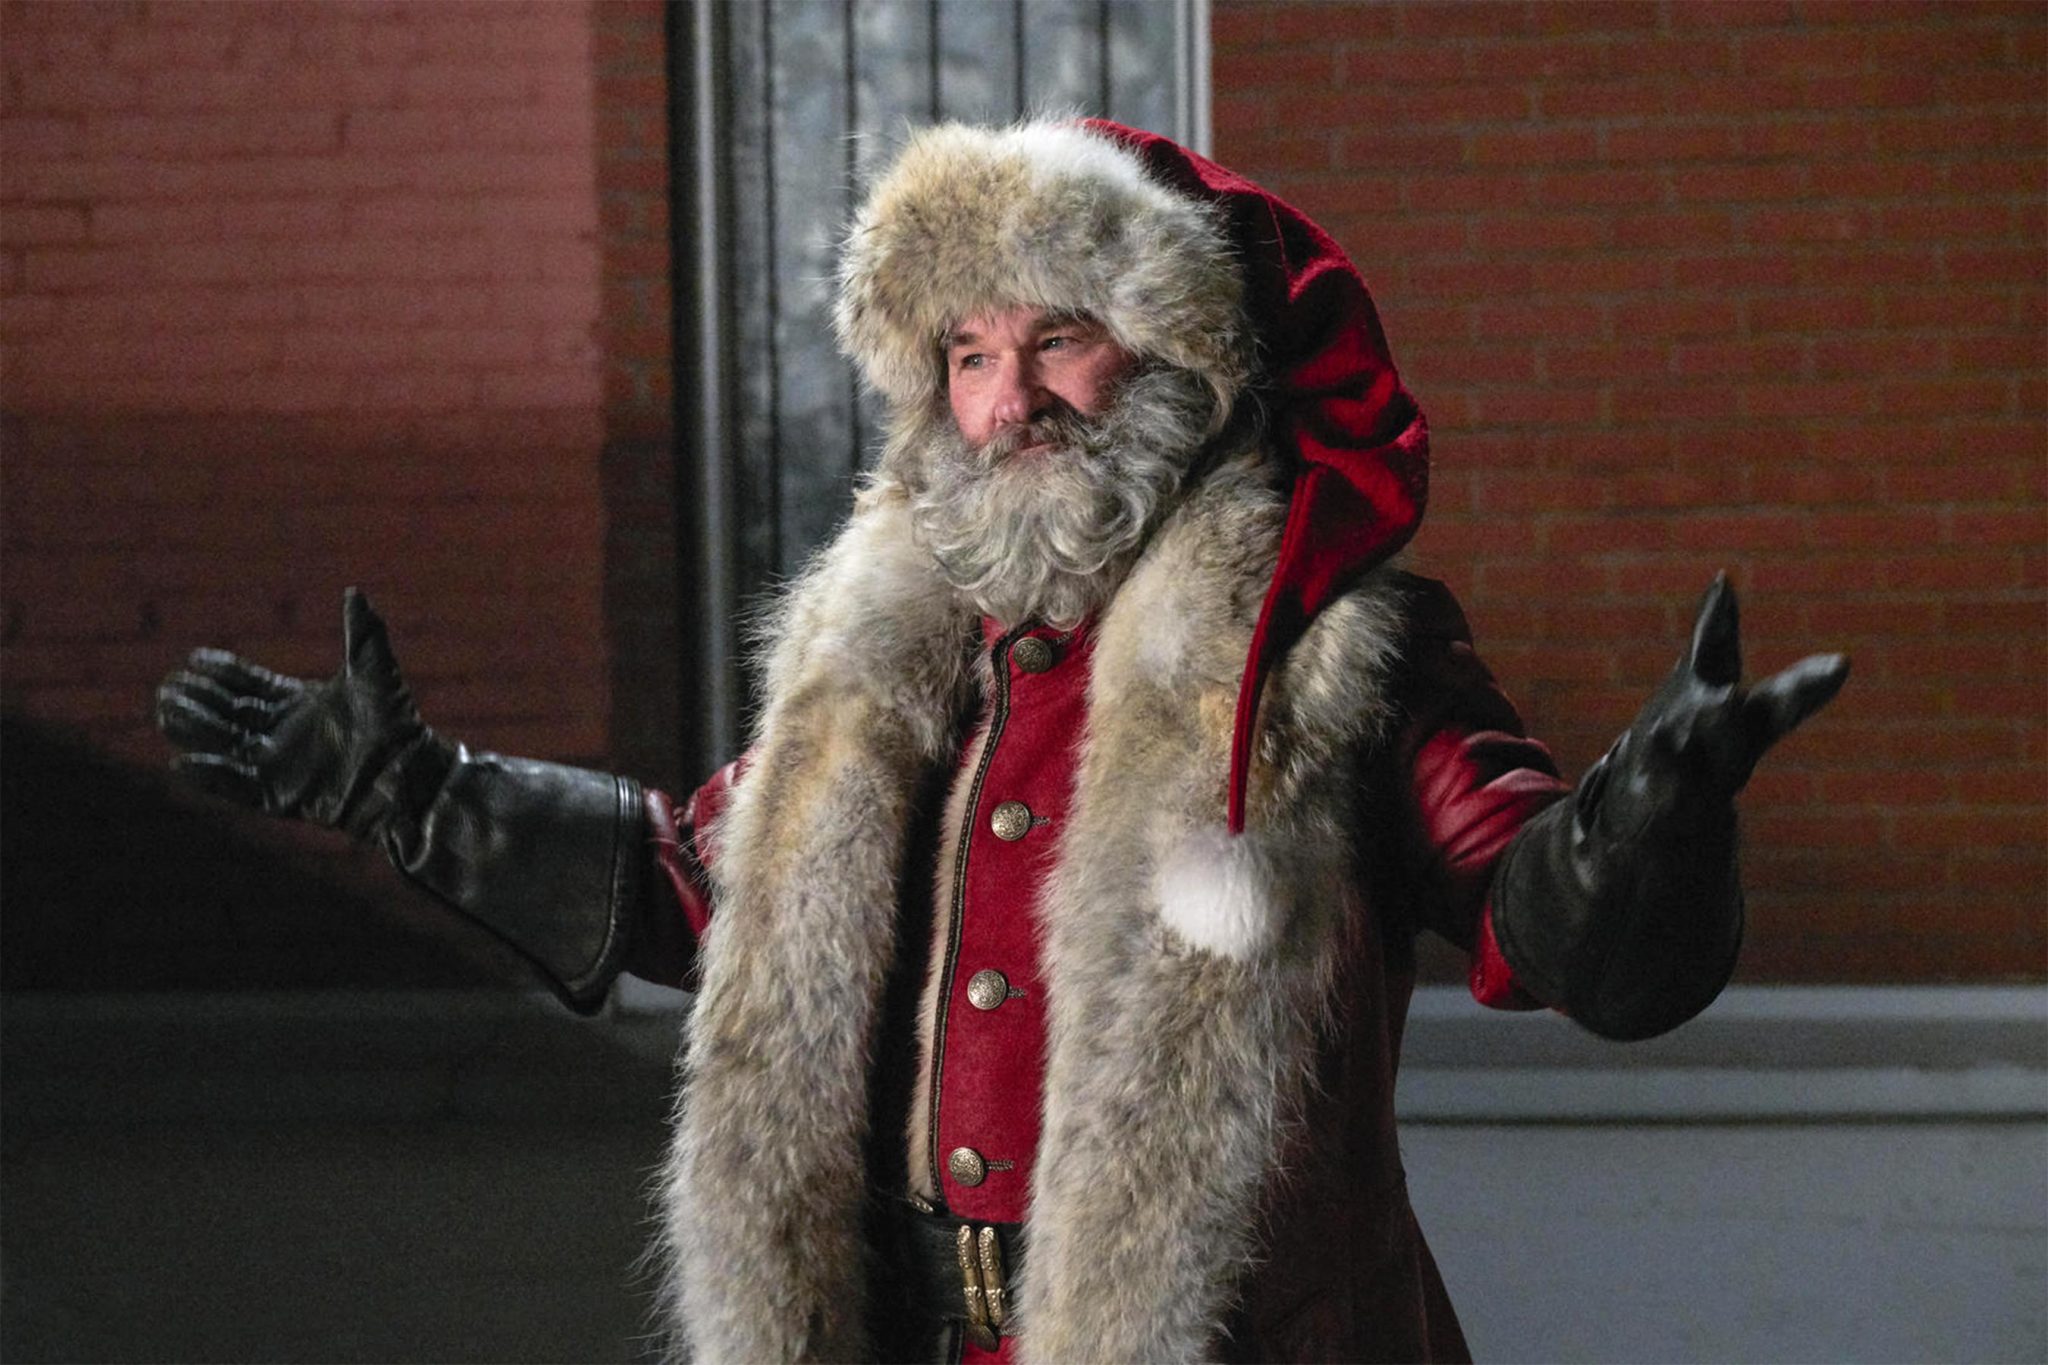 best holiday movies The Christmas Chronicles Kurt Russell as a wisecracking Santa Claus CR: Netflix